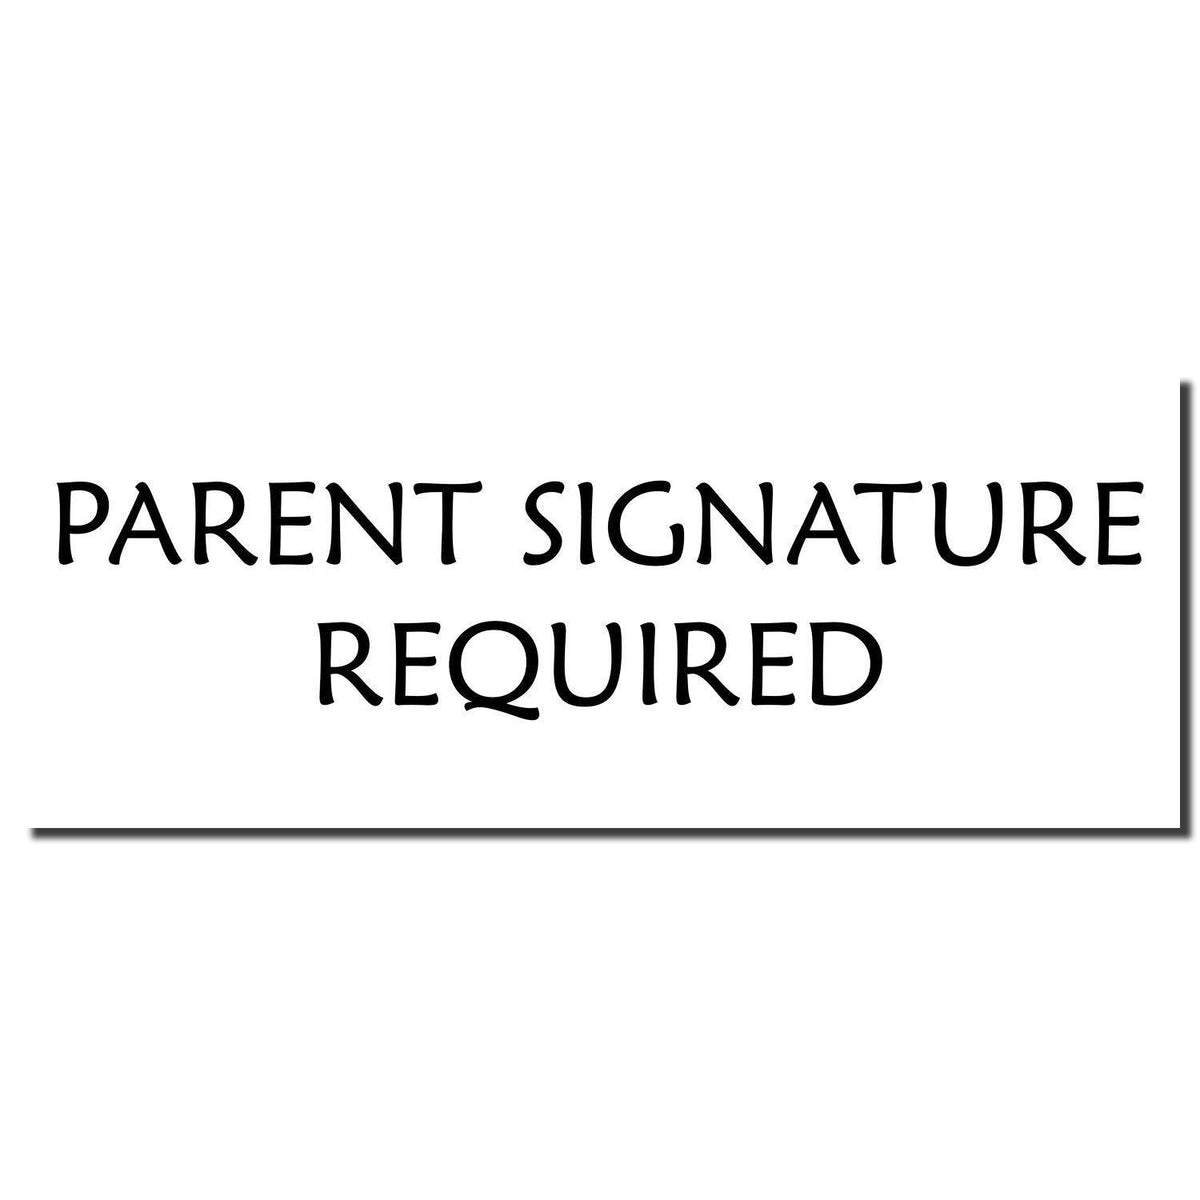 Enlarged Imprint Large Parent Signature Required Rubber Stamp Sample